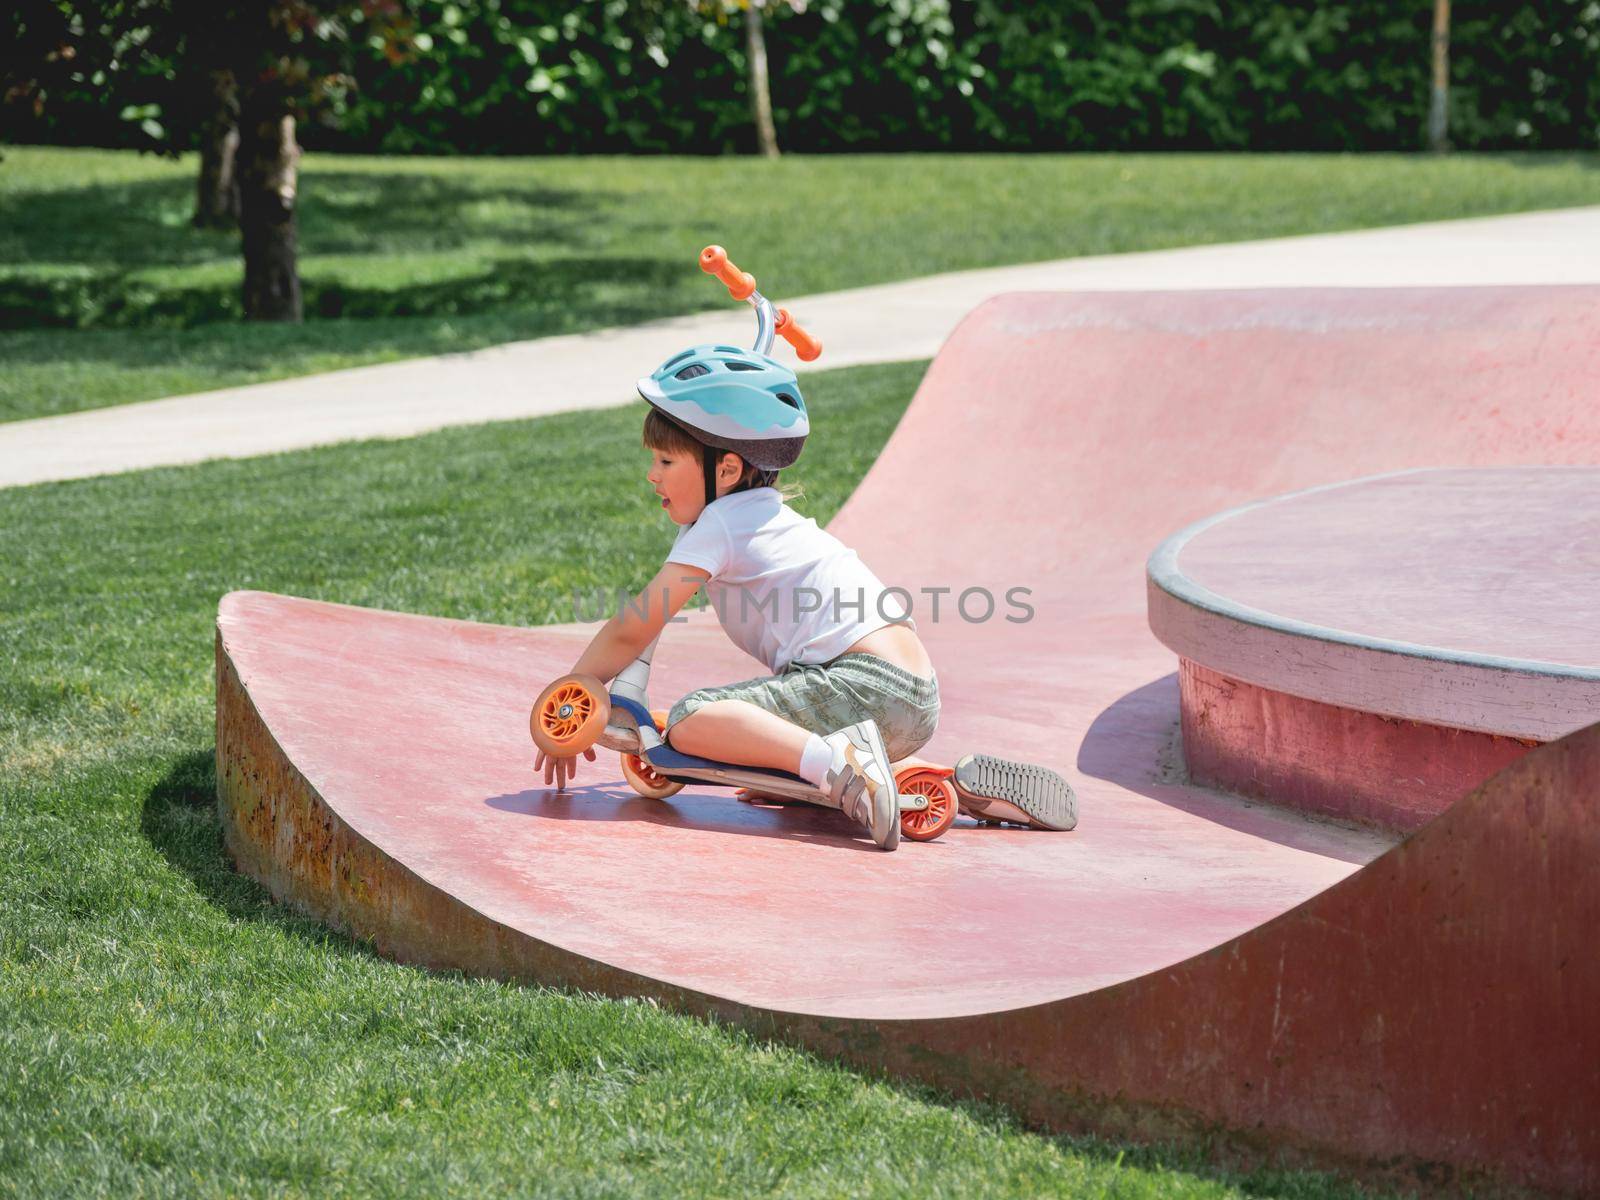 Little boy fell off kick scooter while riding in skate park. Special concrete bowl structures in urban park. Training to skate at summer.